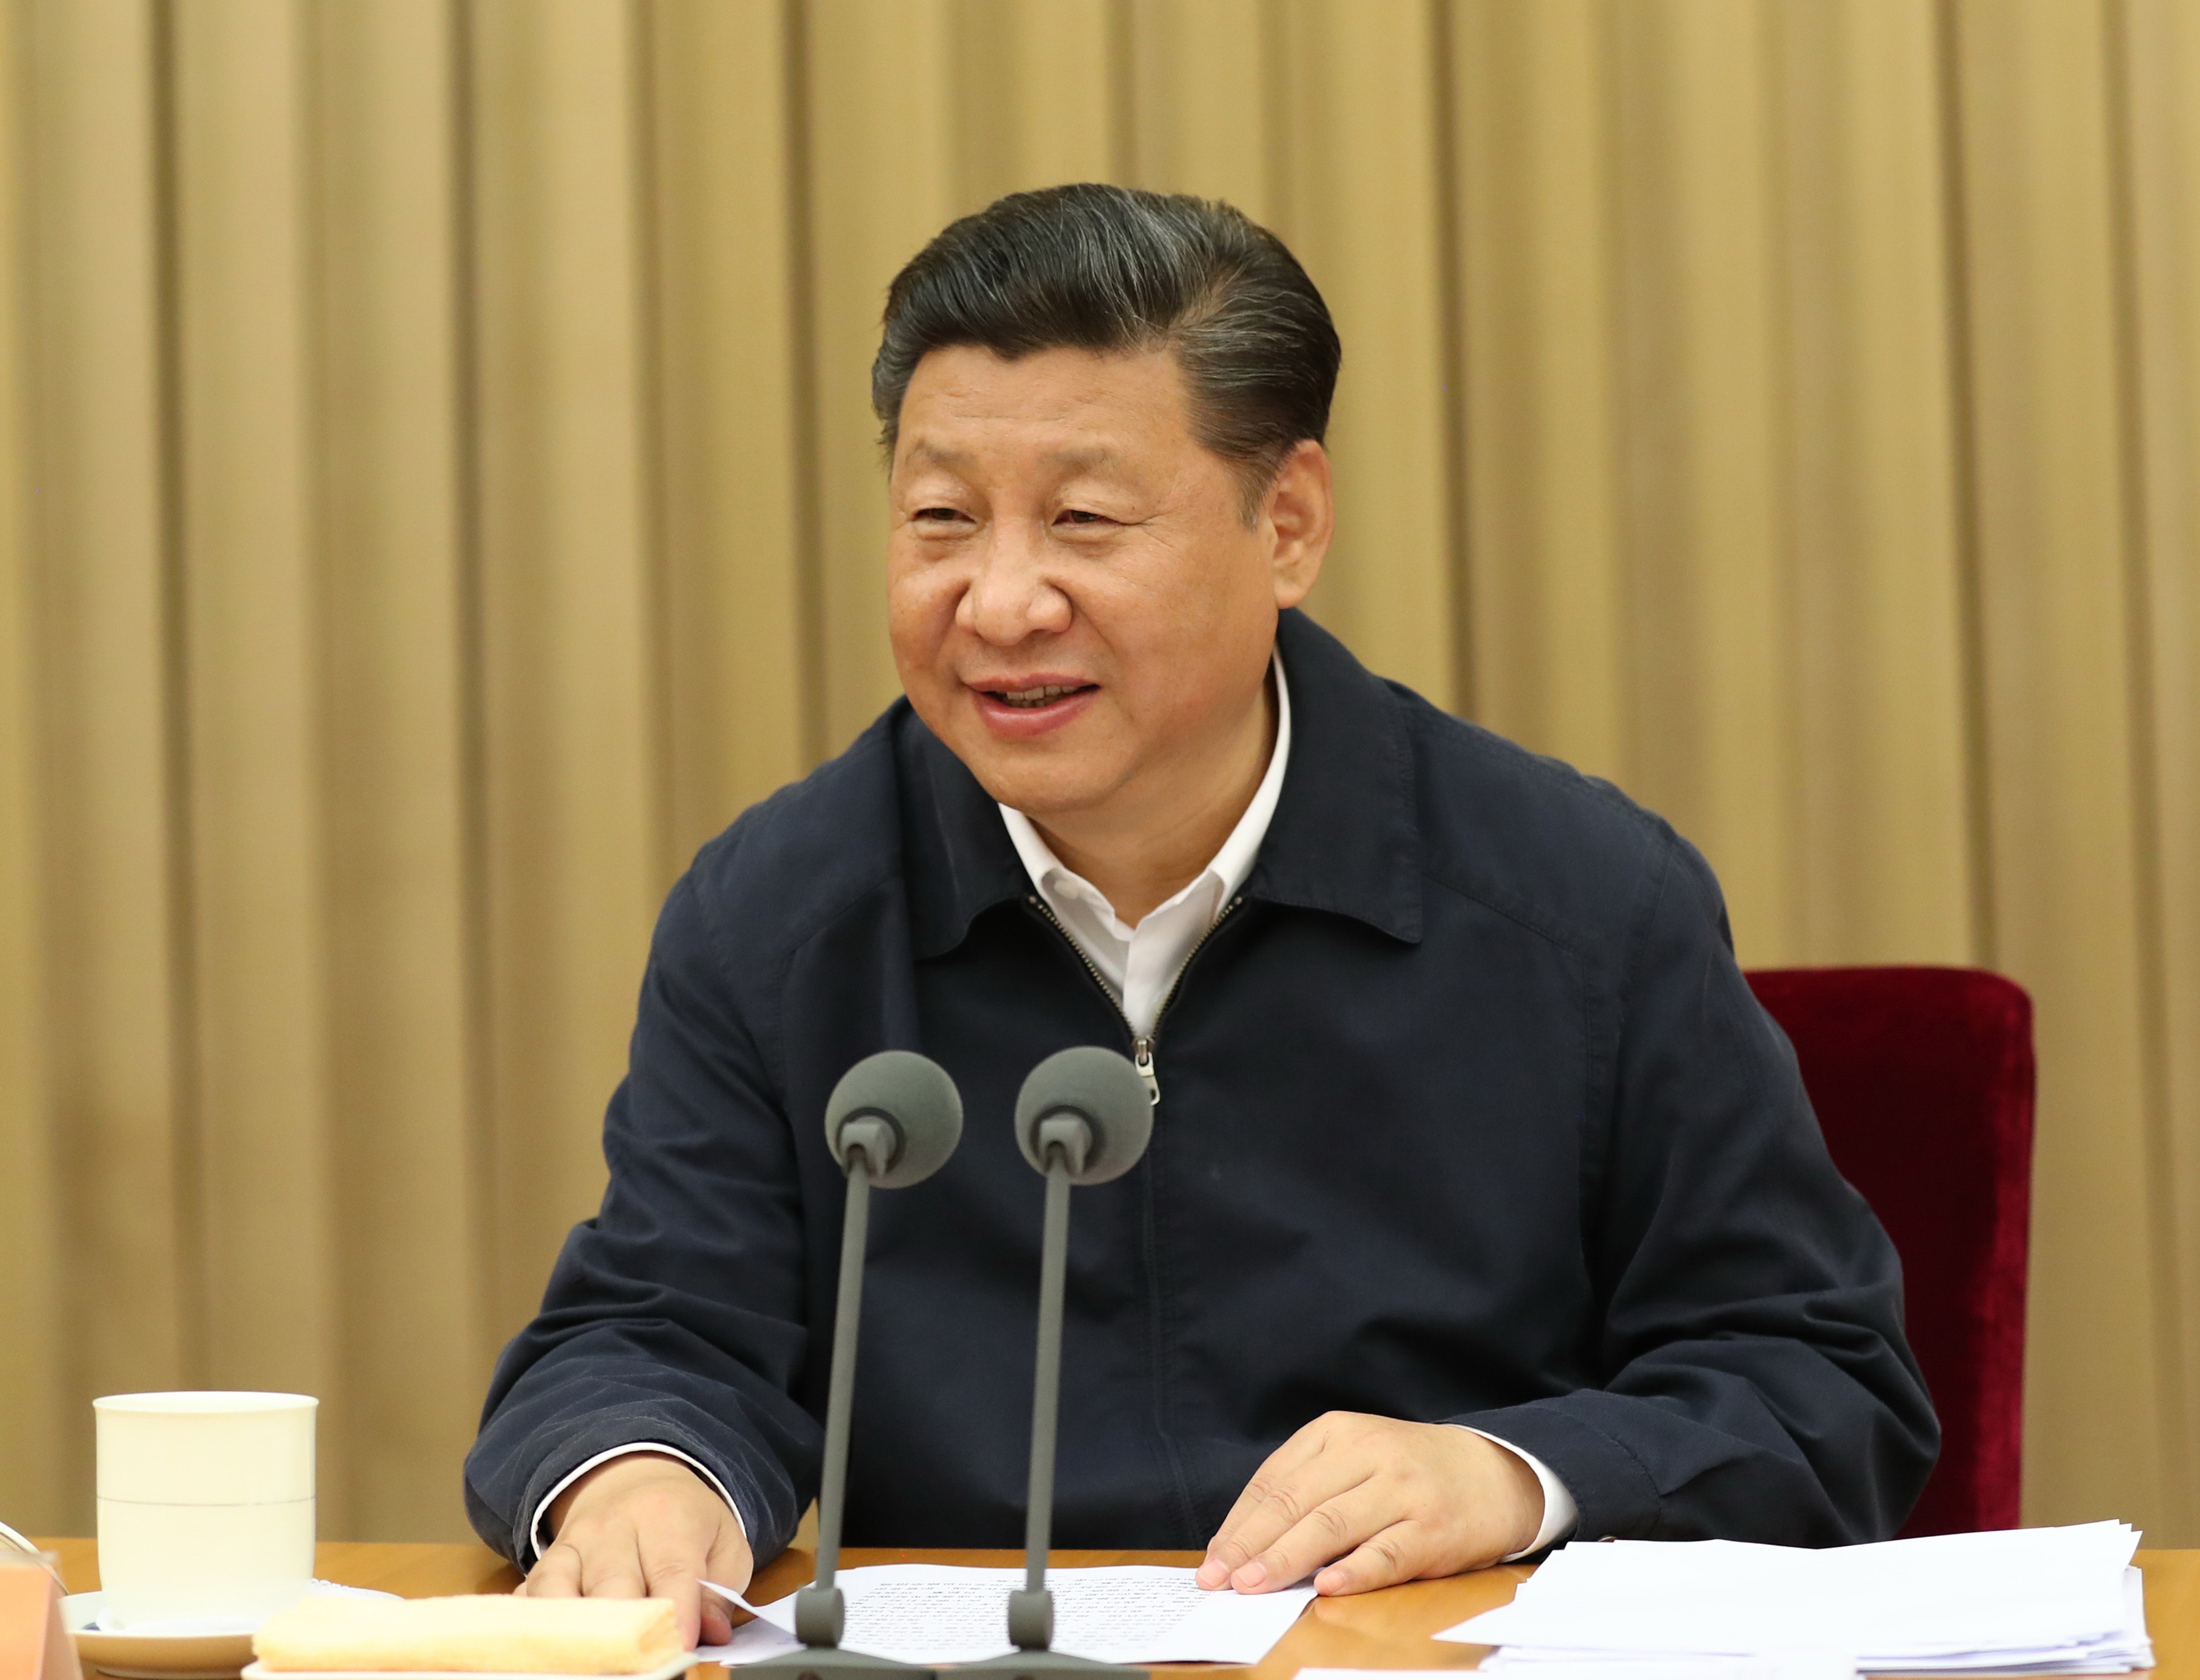 The president’s governing principles are expected to become official Communist Party dogma this week in an attempt to define a new era for the country at home and abroad